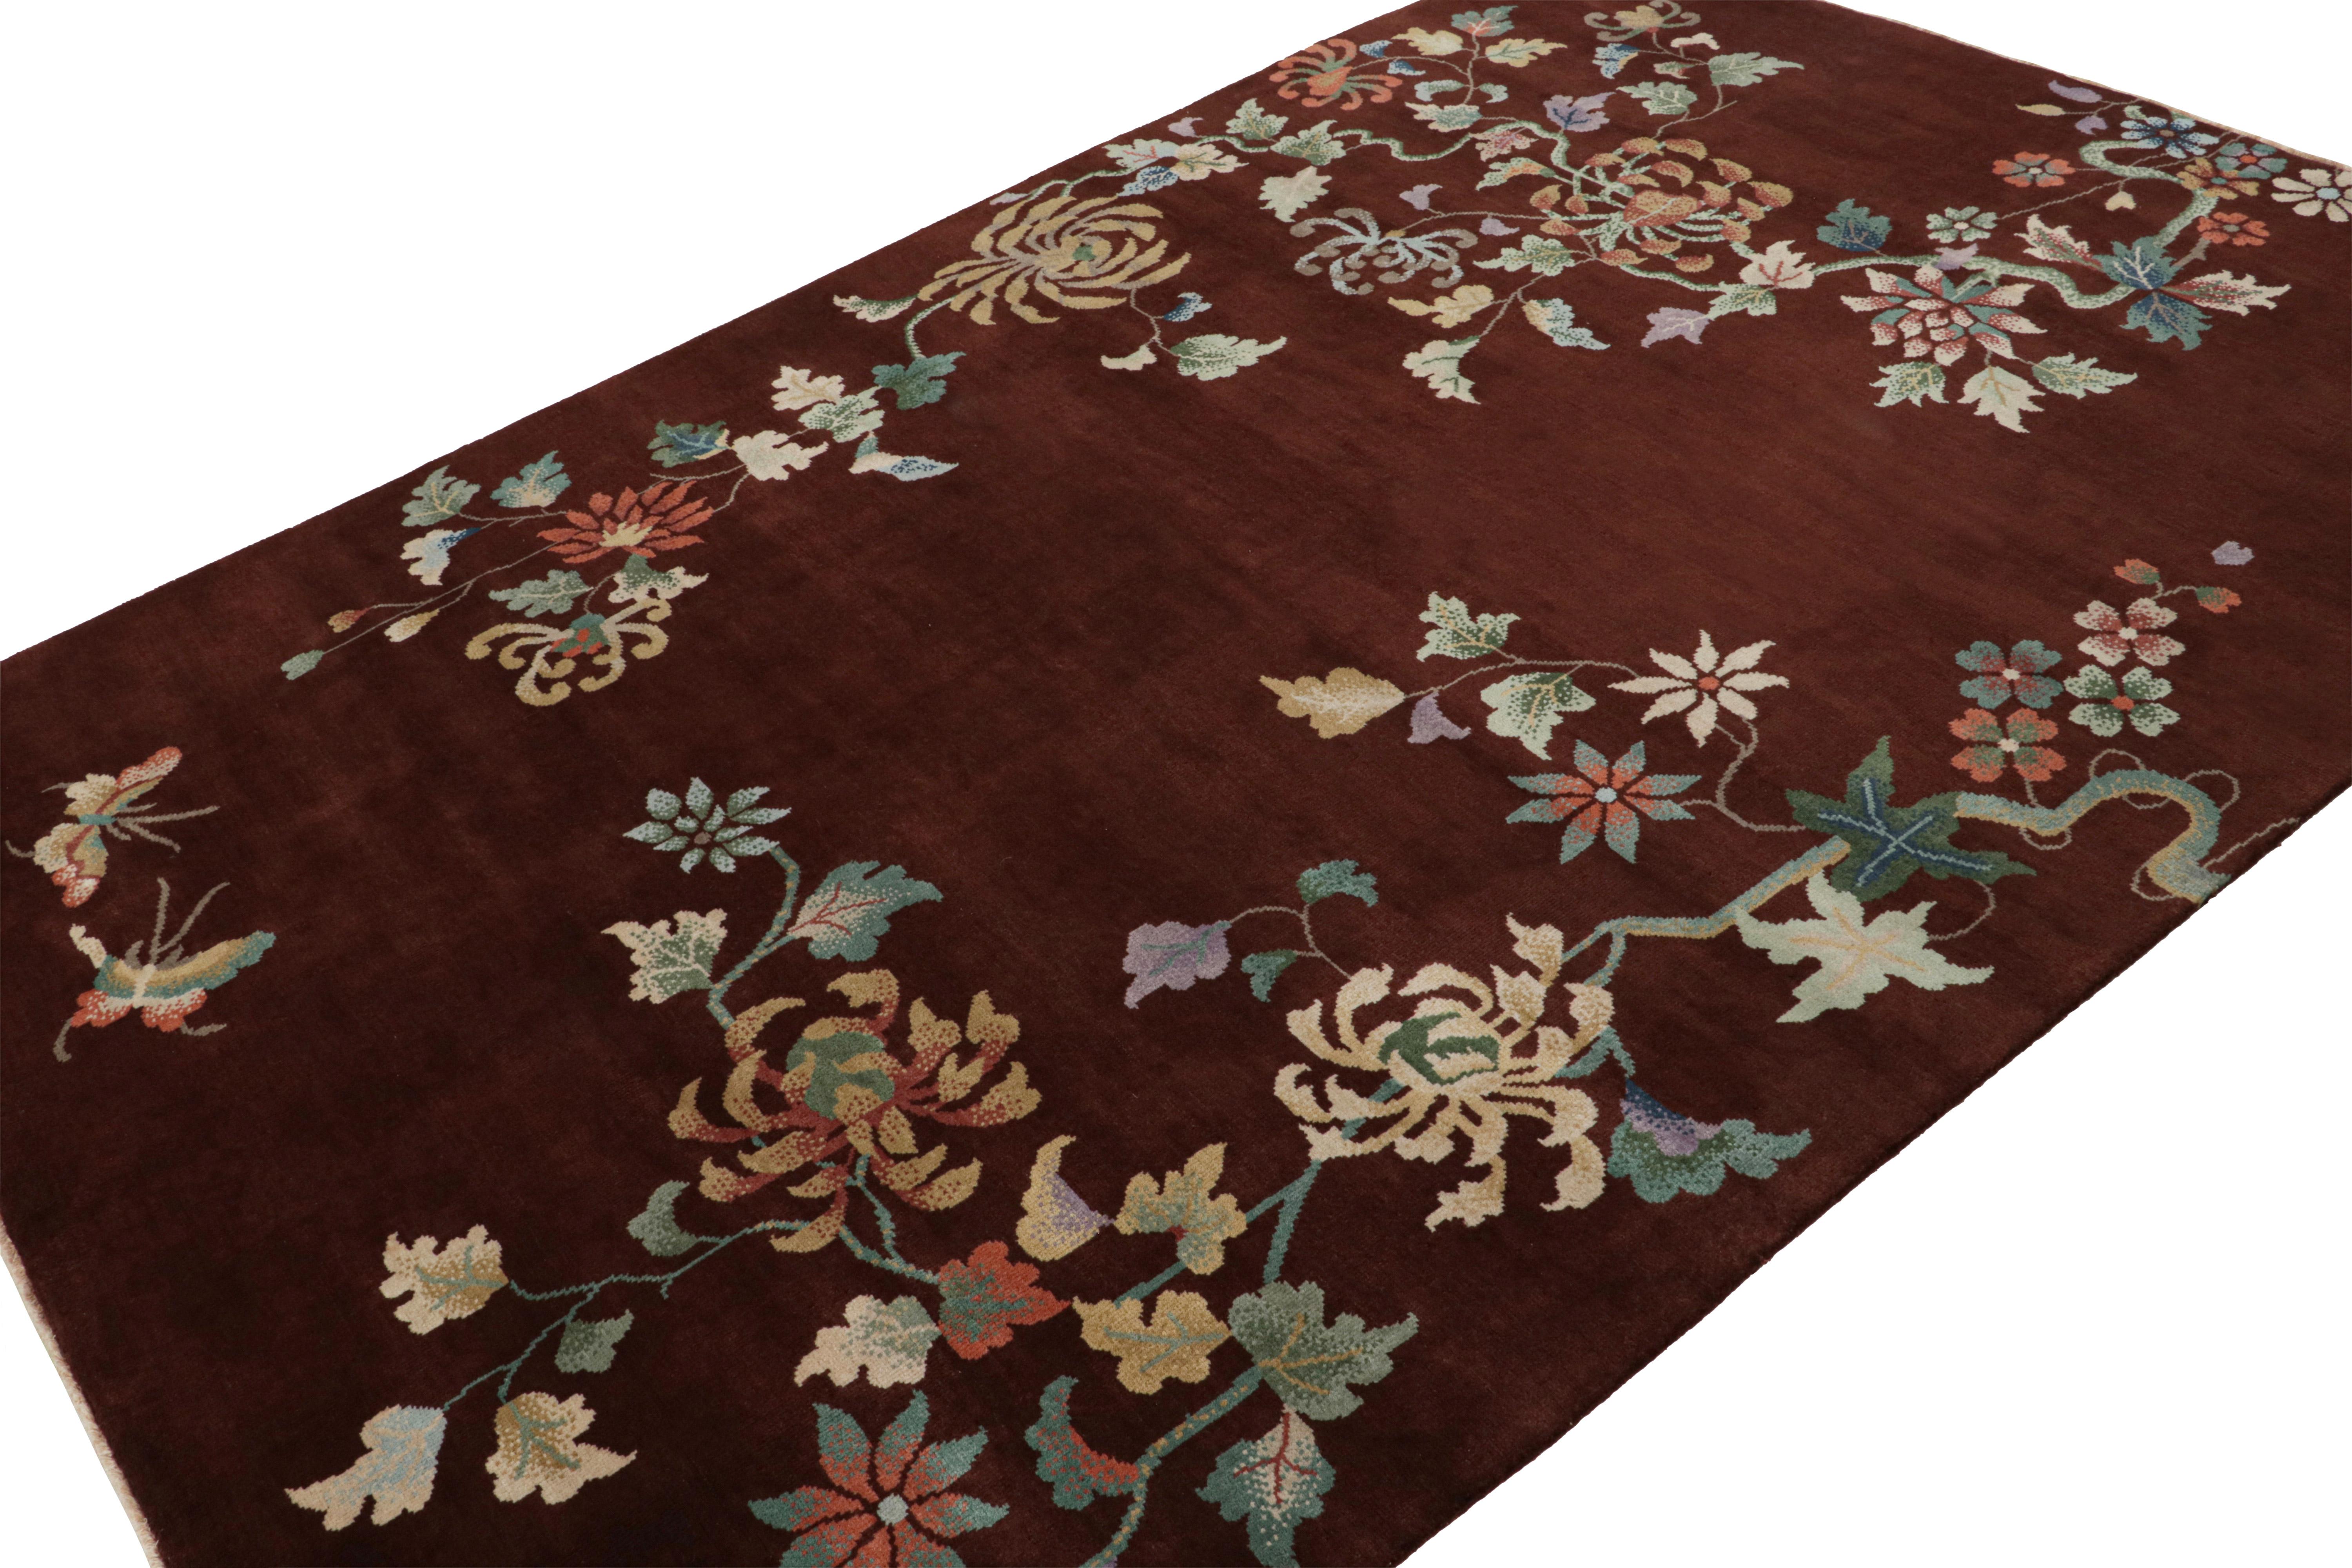 Hand knotted in wool, a 6x9 Chinese art deco style rug inspired by rare period pieces of the 1920s Nichols style. 

On the Design: 

The design boasts rich brown and burgundy undertones with more vibrant floral patterns and butterfly pictorials in a